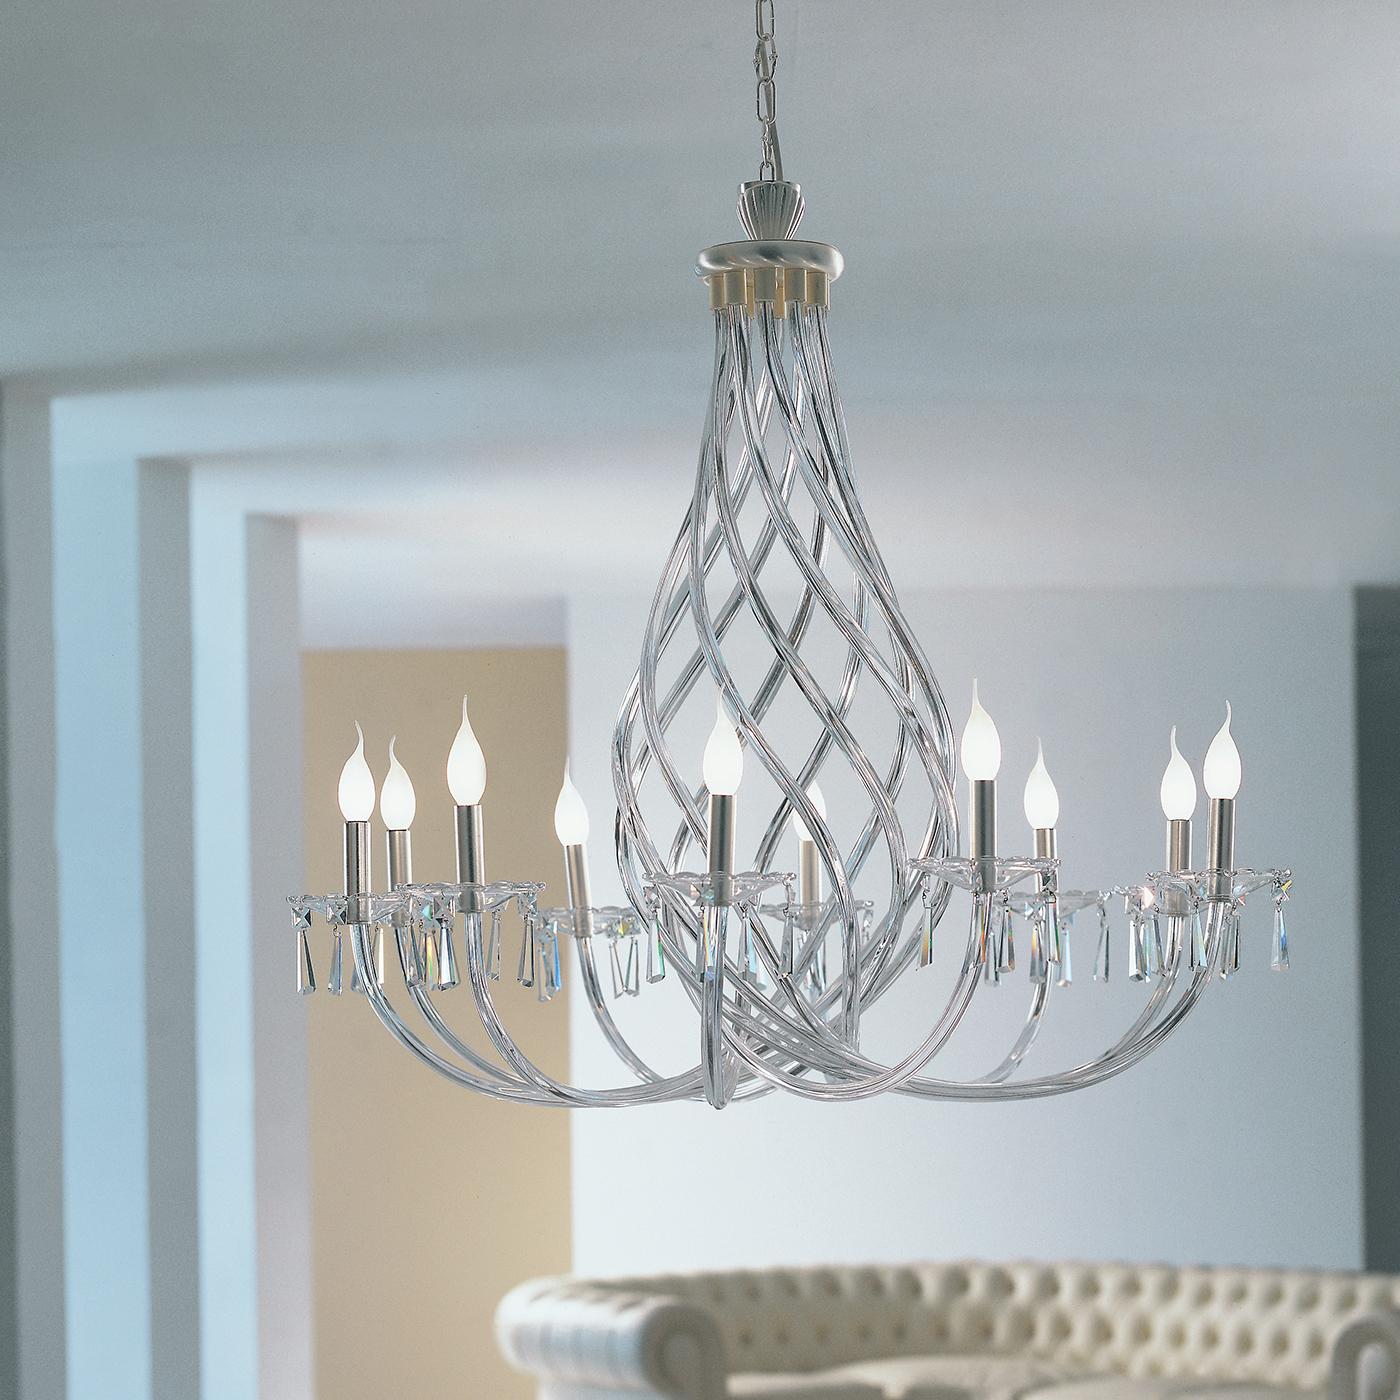 Characterized by an elegant and modern design, this chandelier brings an element of class and creativity to any modern style living space. With a spectacular structure in clear Murano glass, the piece features detail in a matte gold or satin silver